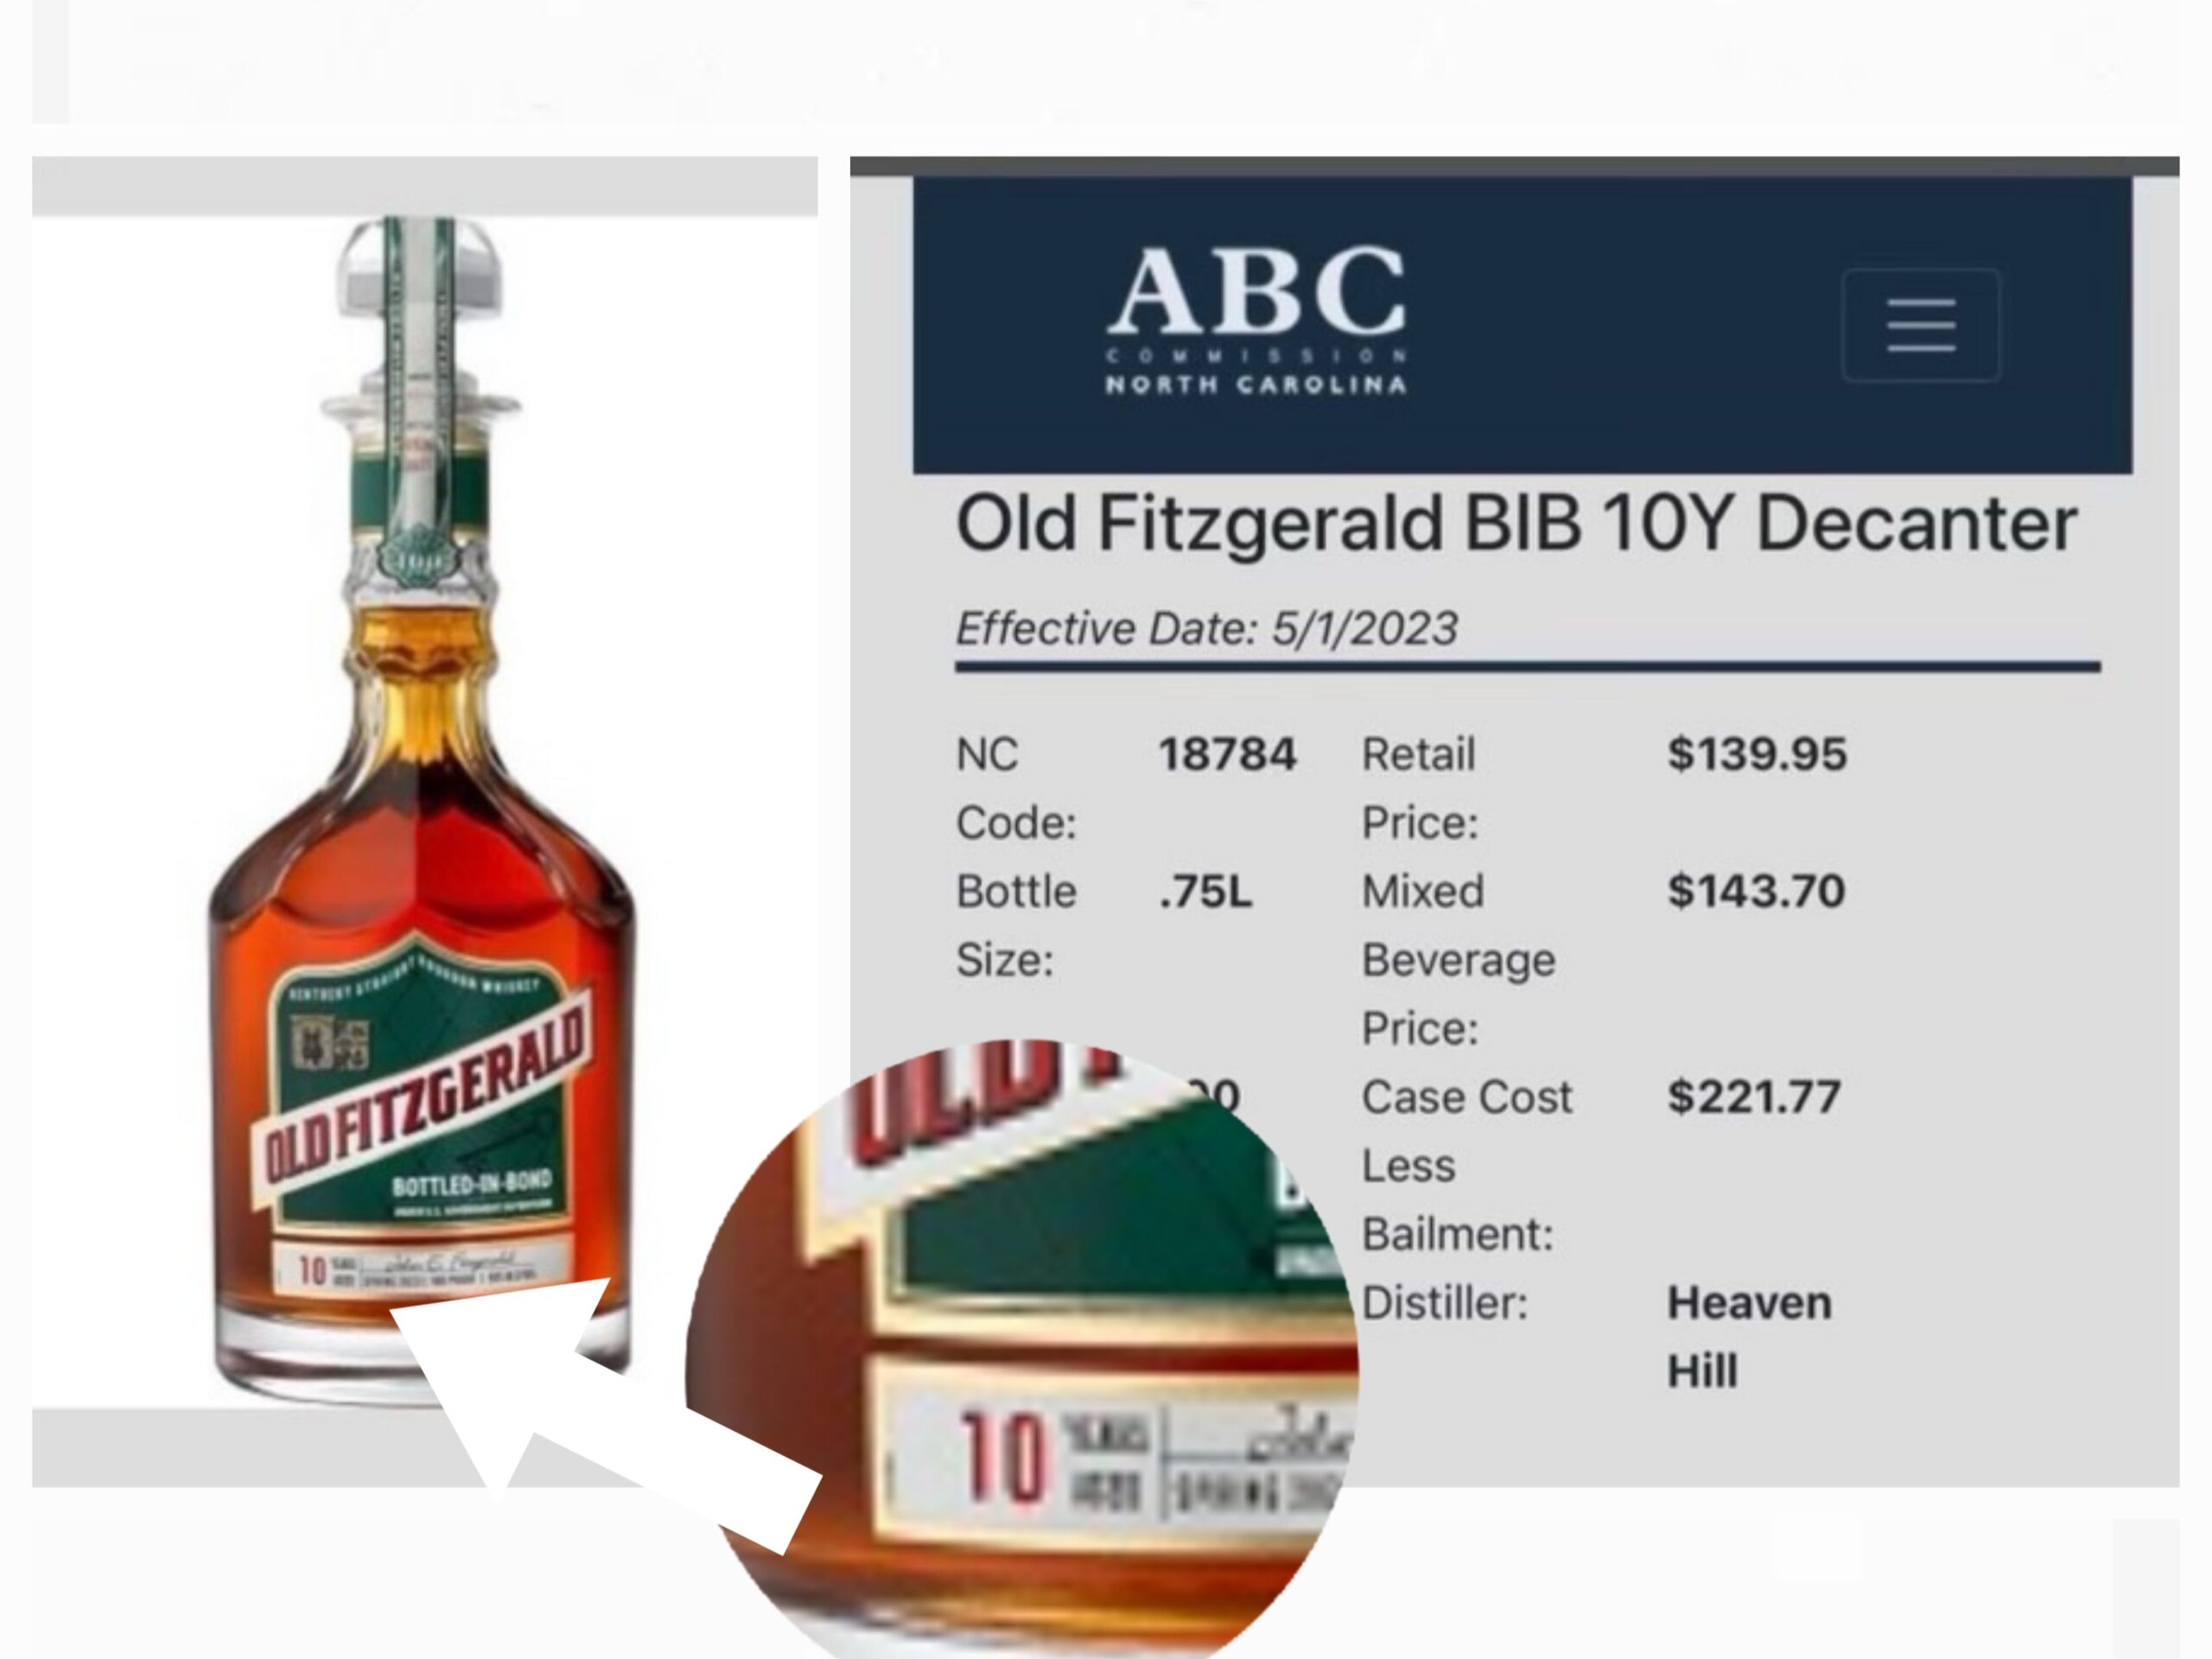 New release info for the next Old Fitzgerald Bottled-in-Bond Decanter found in the most unlikely place